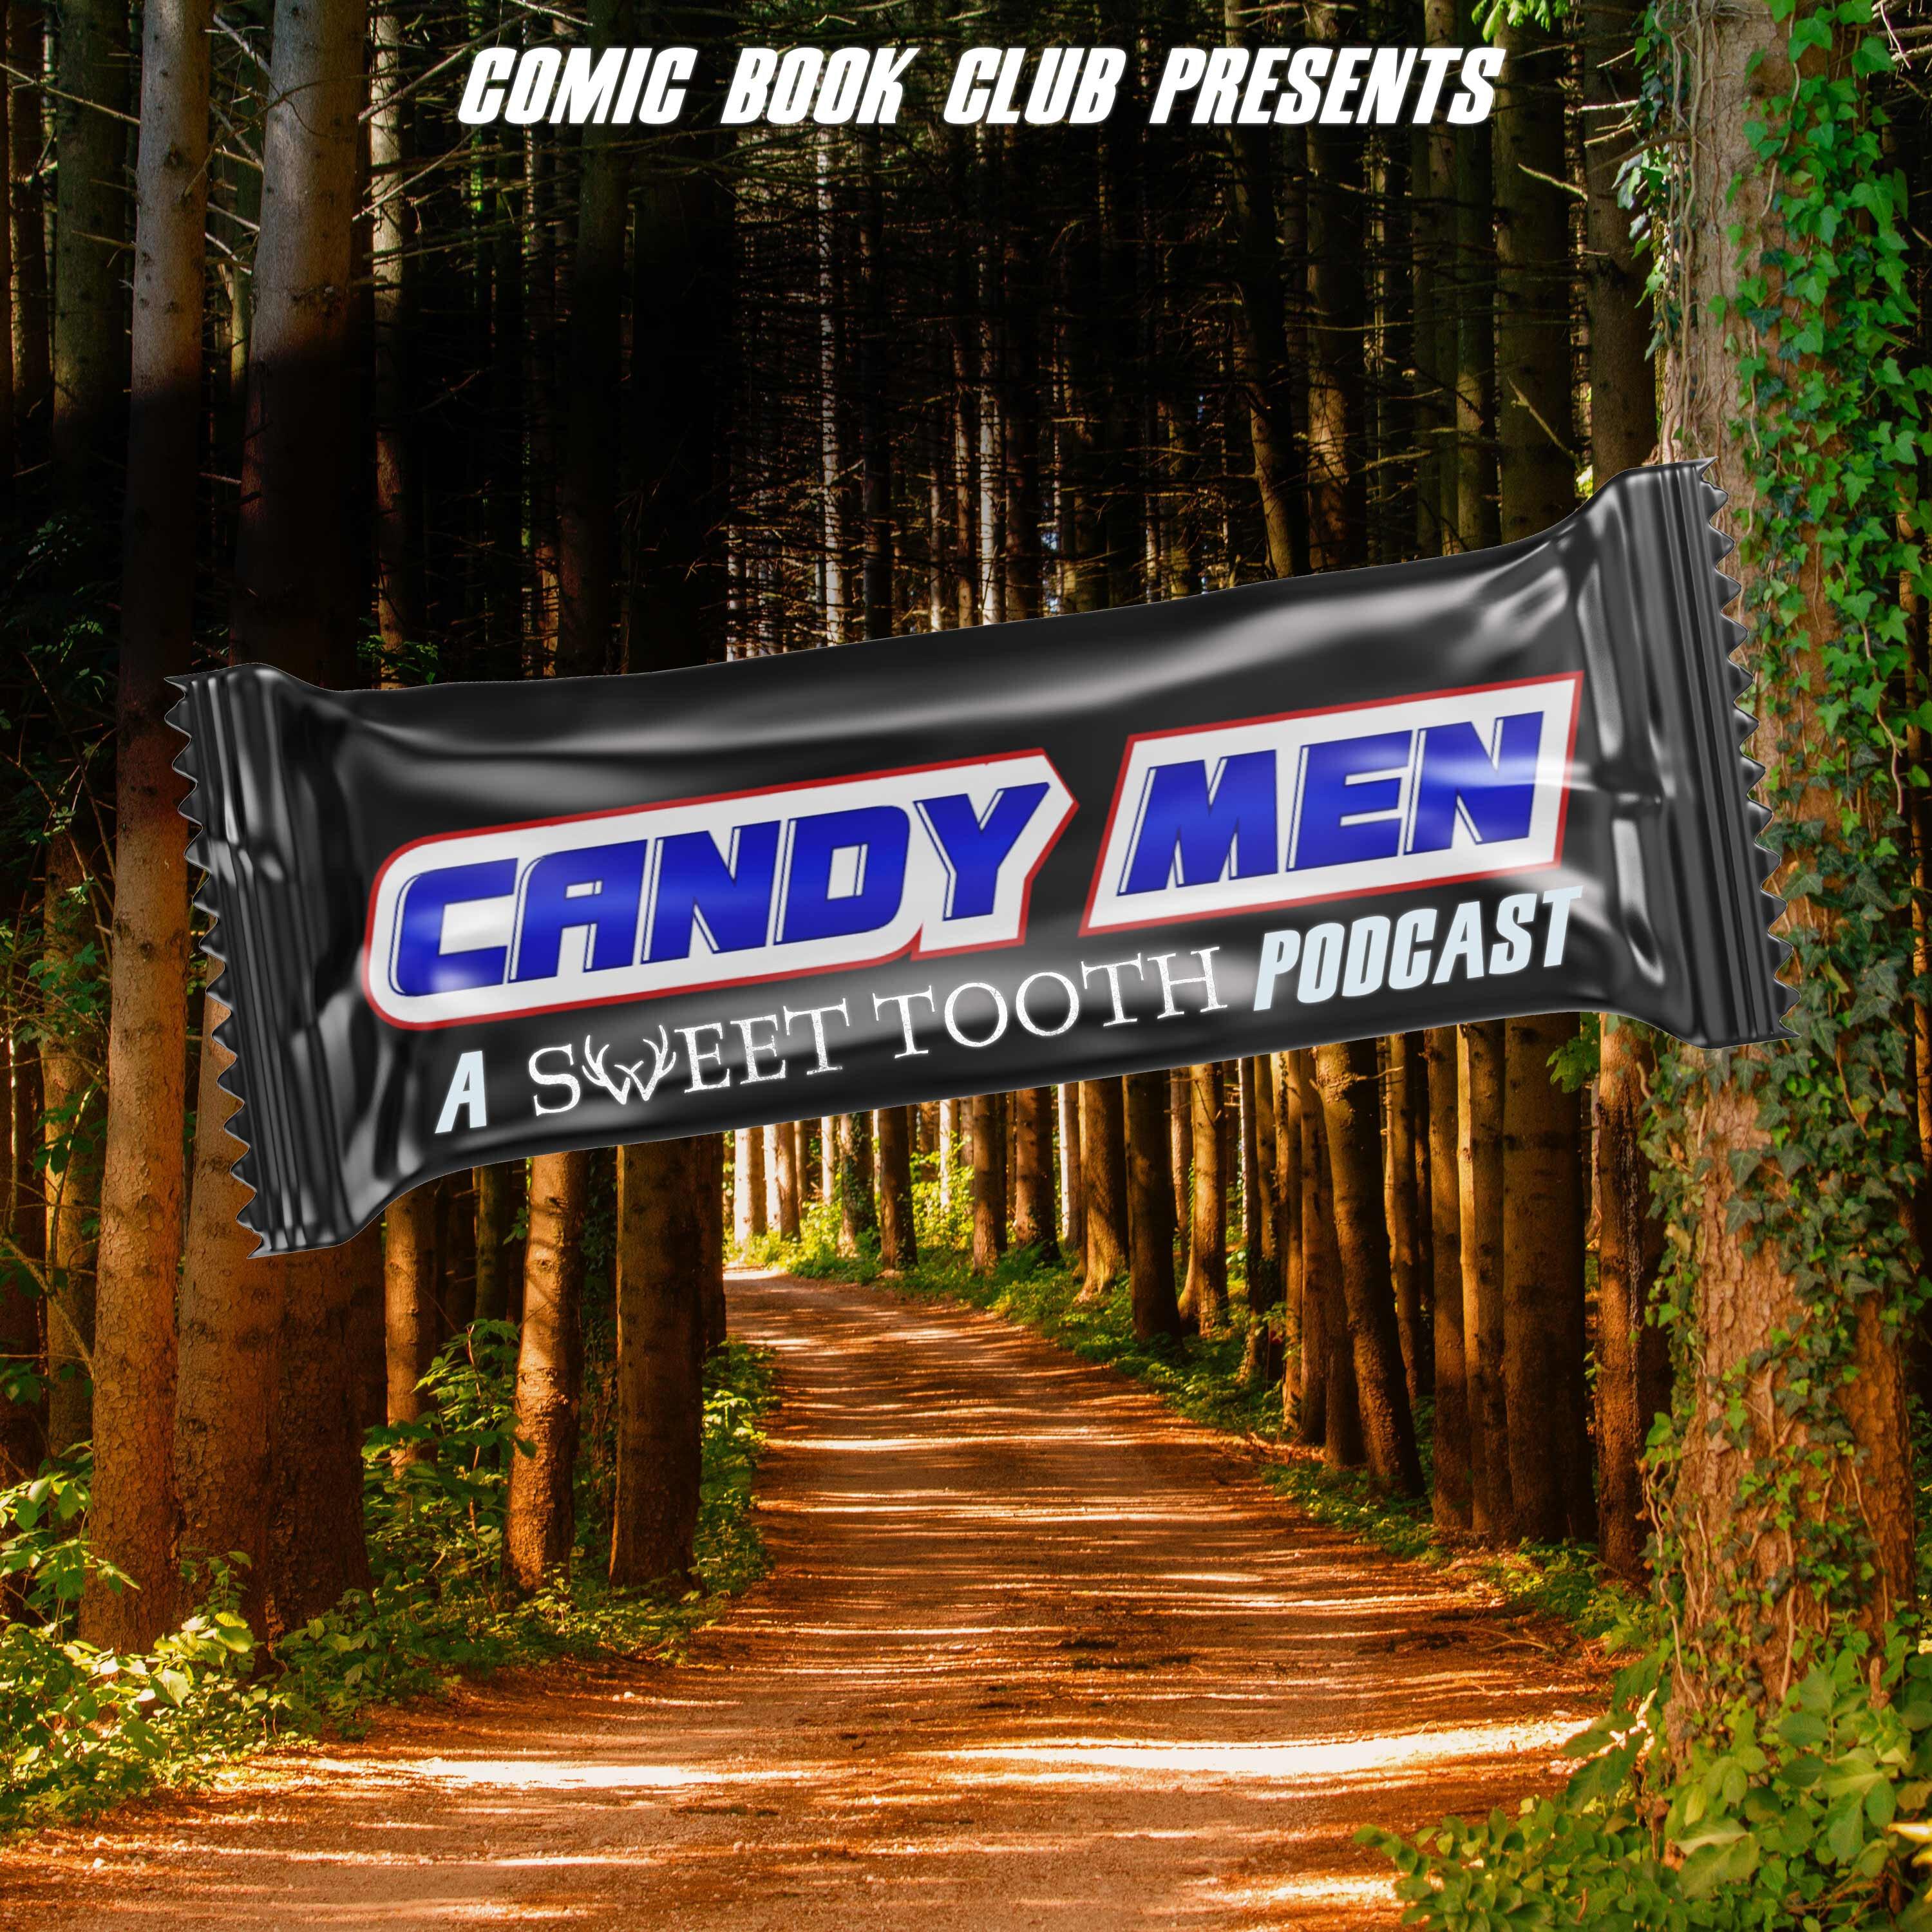 Candy Men: A Sweet Tooth Podcast